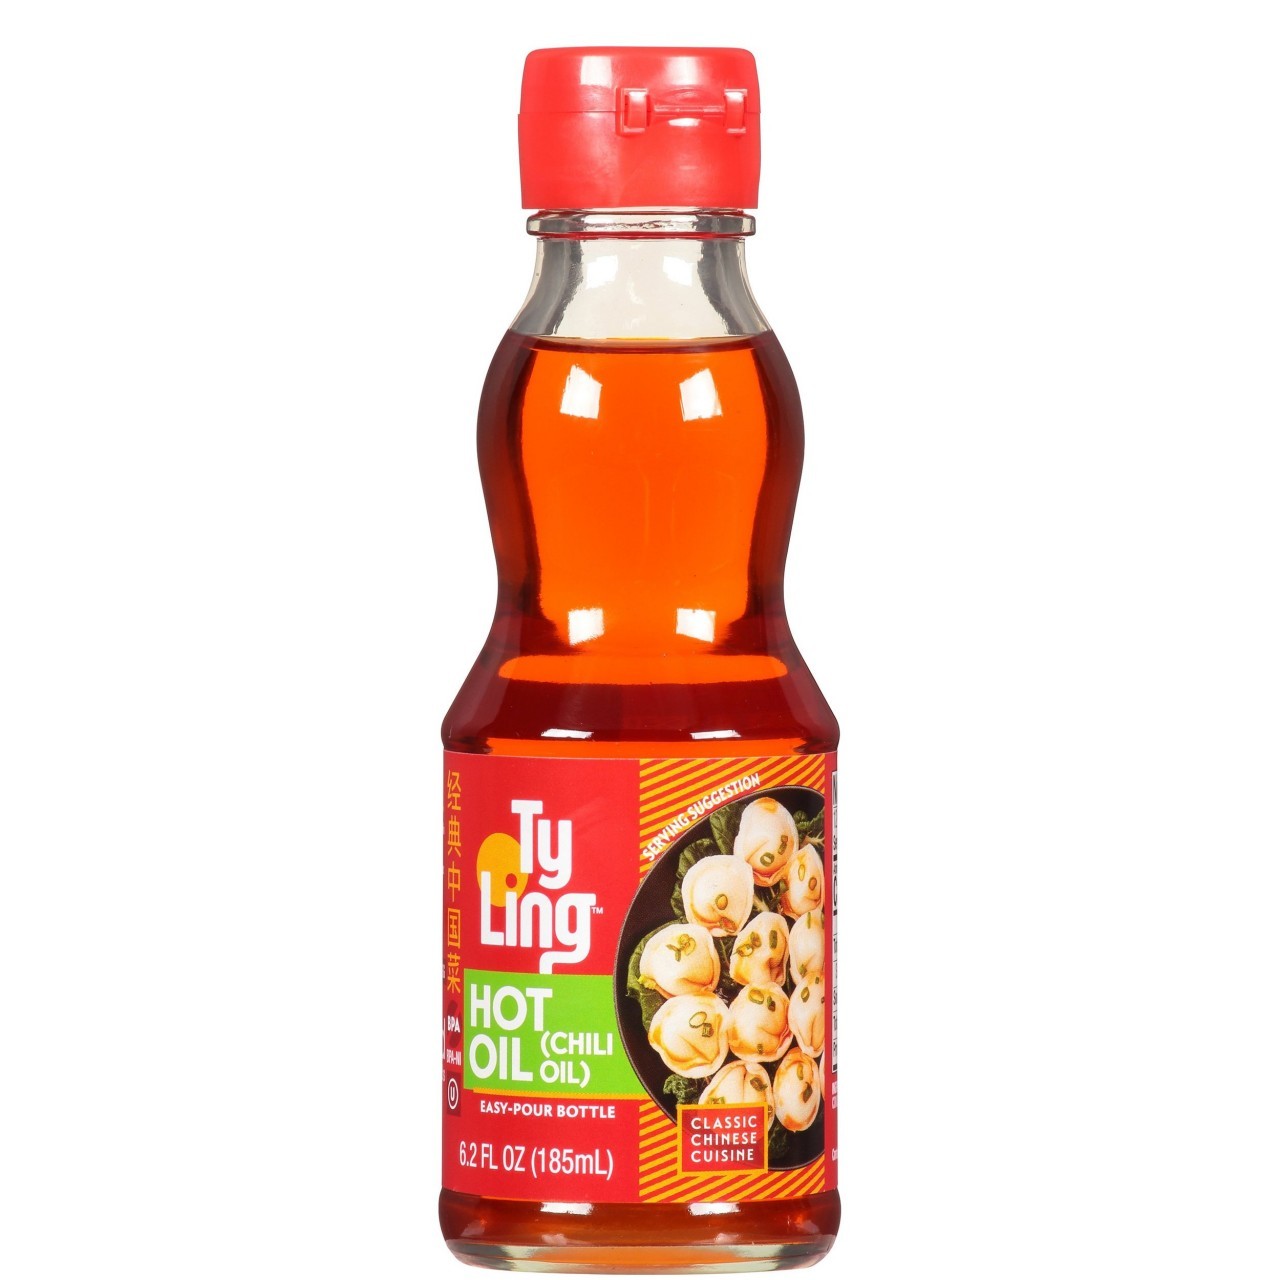 TY LING HOT CHILI OIL 6.2oz